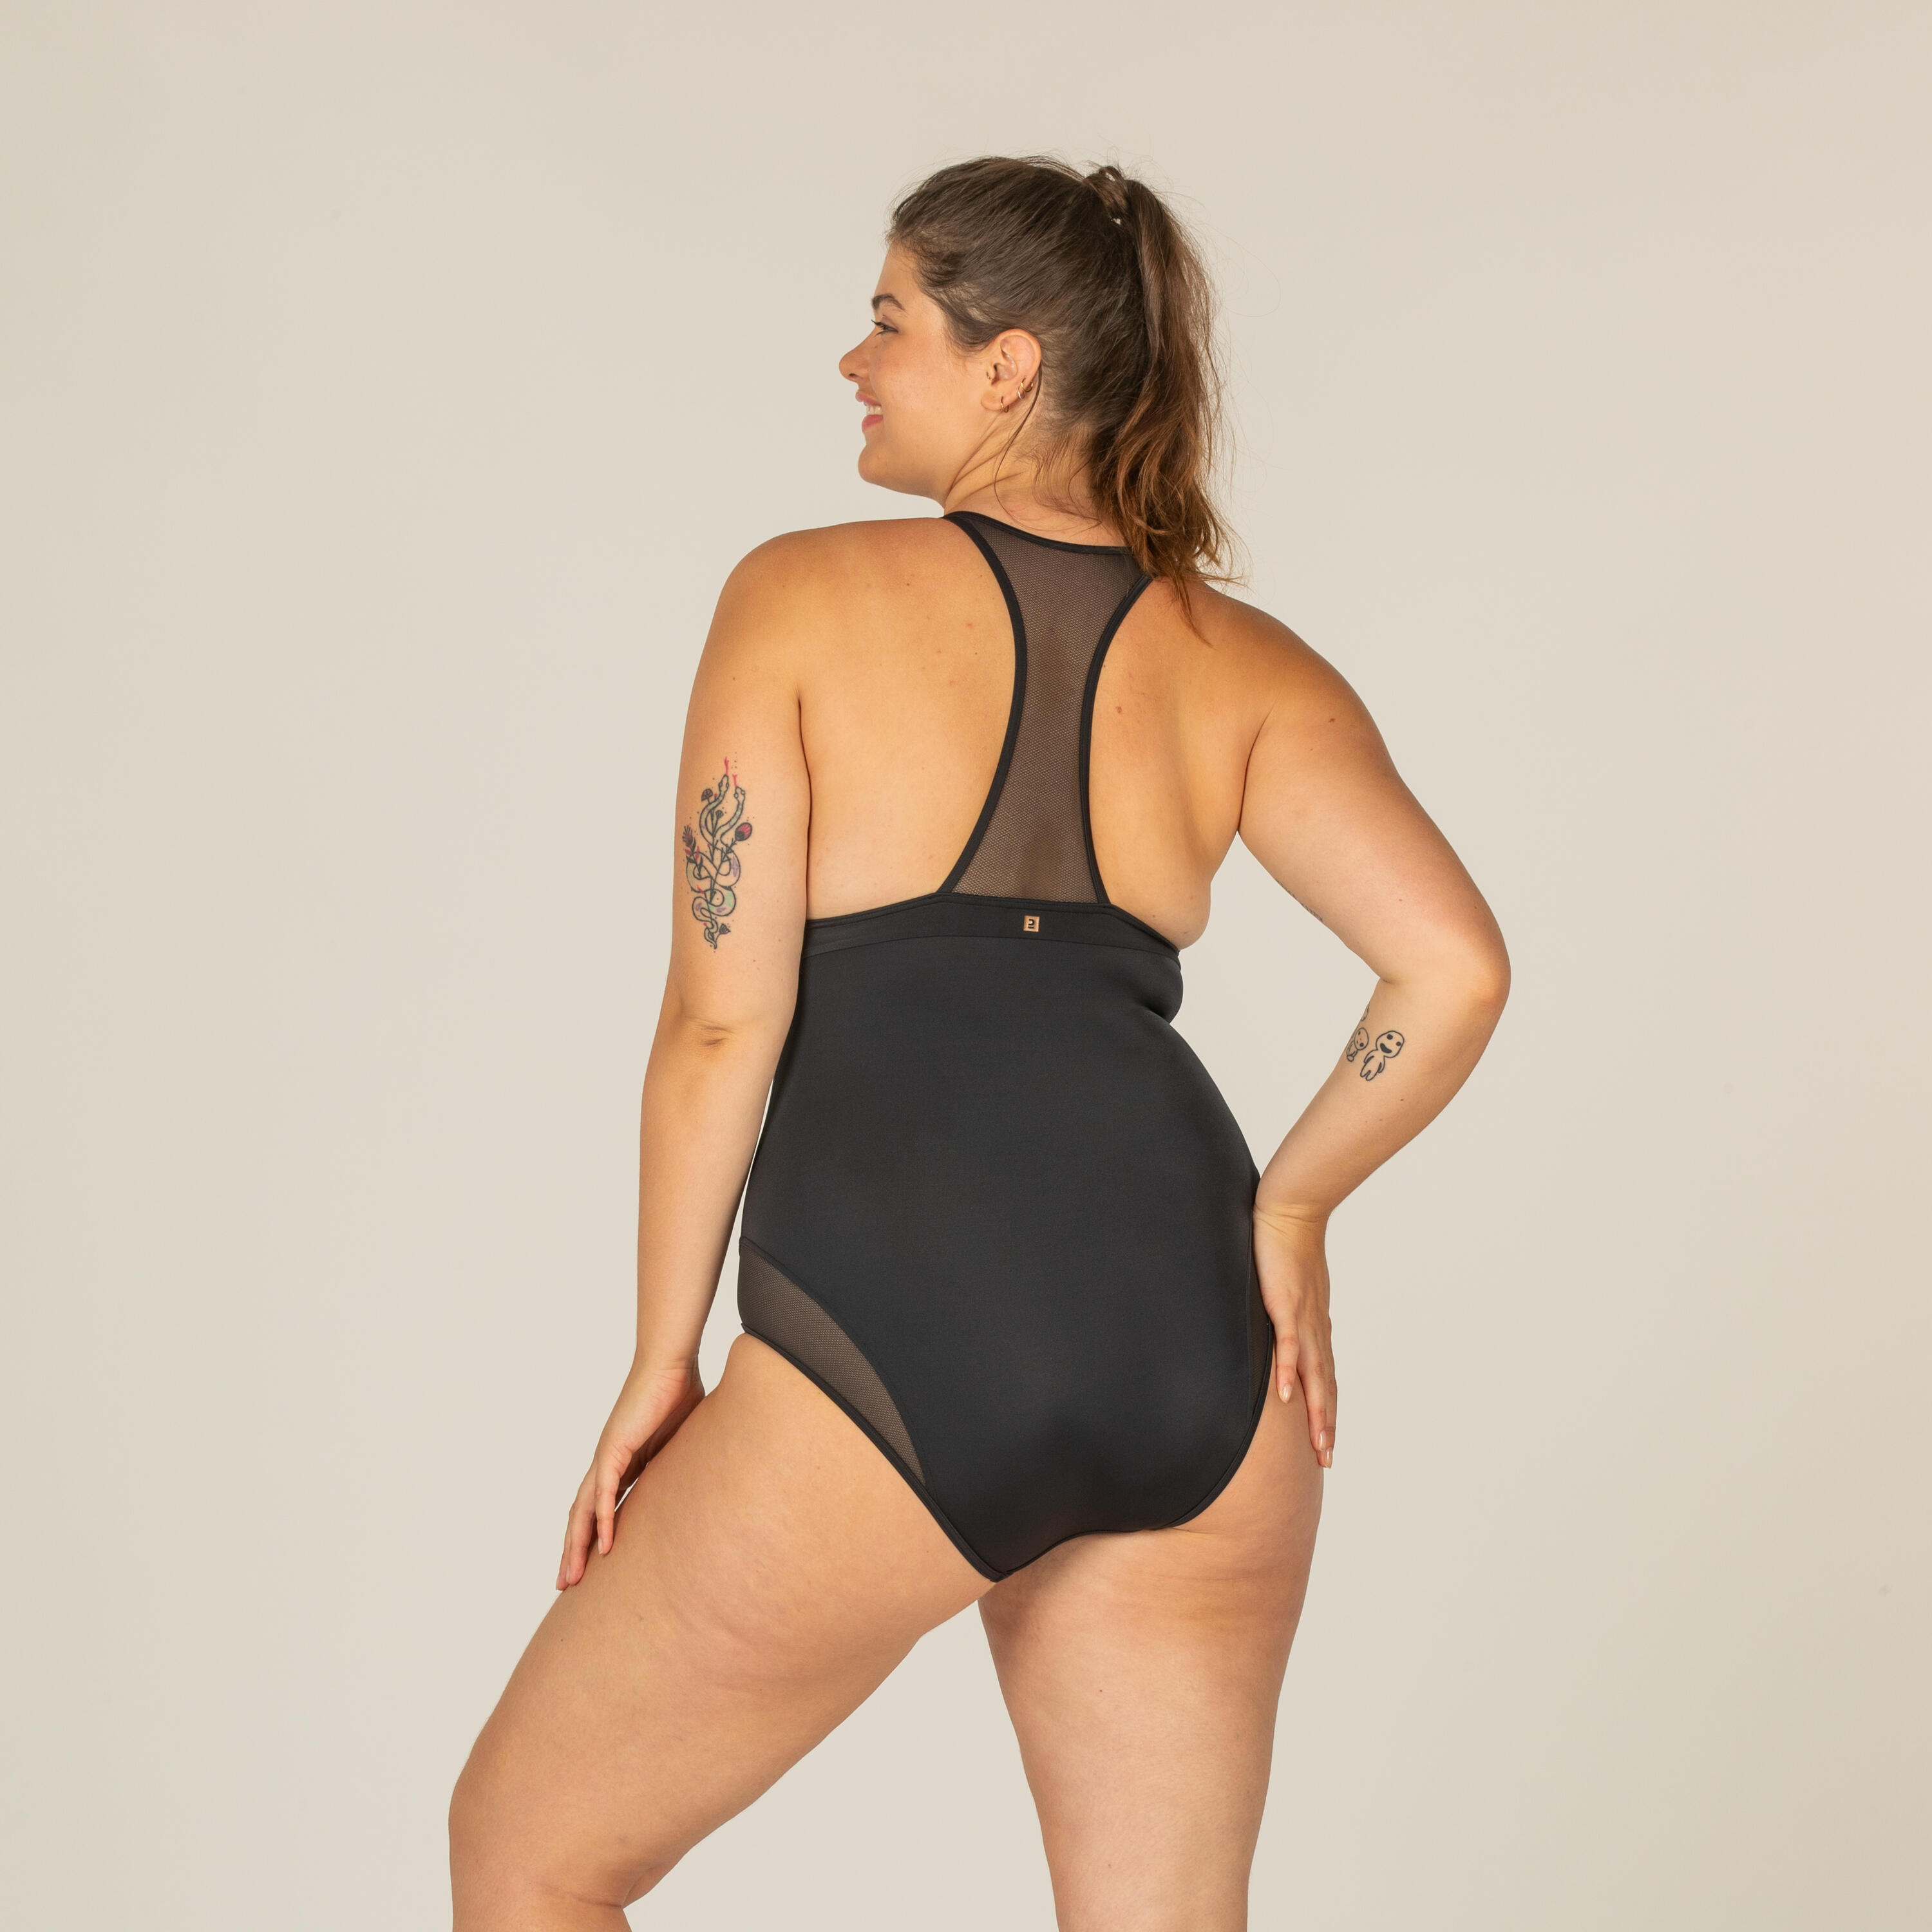 WOMEN'S SURFING SWIMSUIT WITH X BACK ISA 14/15